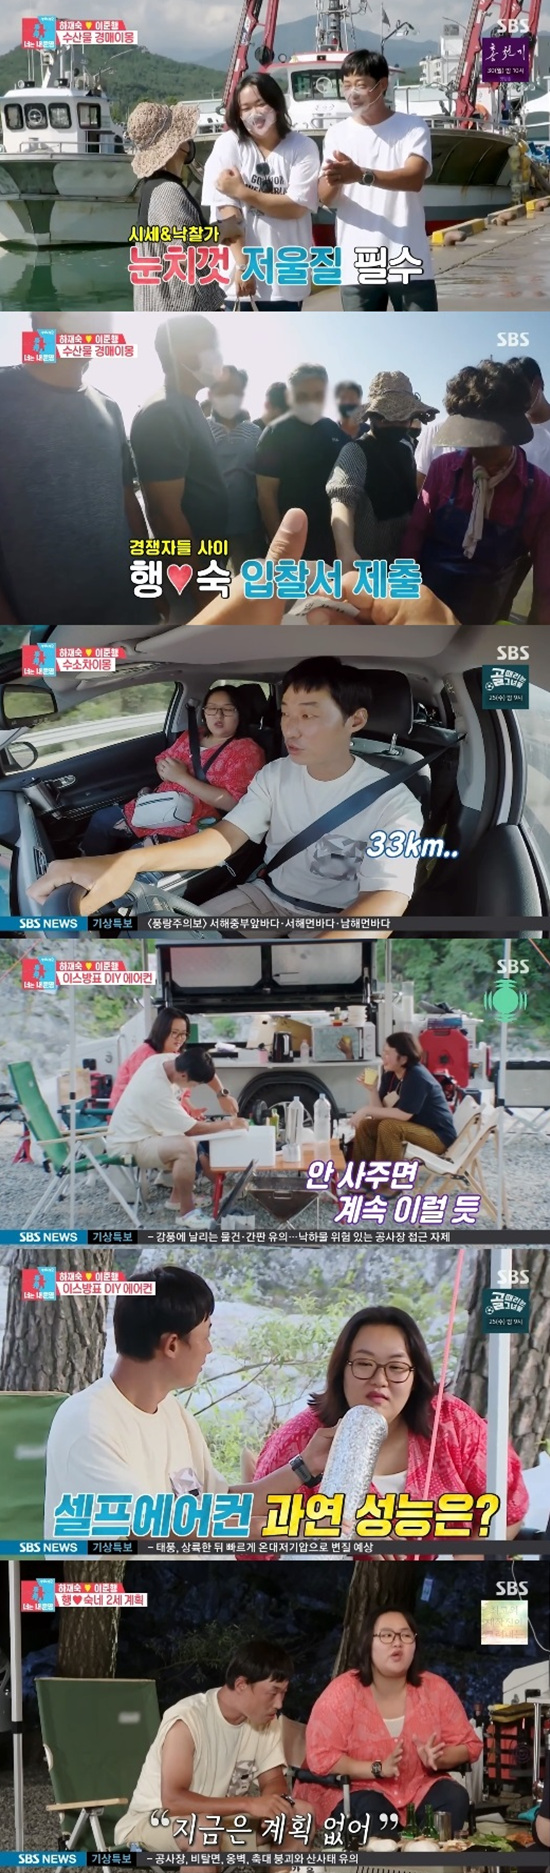 No Plan for the Second Year (Sangsangmong)On SBS Same Bed, Different Dreams 2: You Are My Dest - You Are My Destiny broadcast on 23rd, Ha Jae-sook and lee jun-haengThe image of the second generation saying that there is no plan was broadcast.Ha Jae-sook and lee jun-haeng on this dayI found a fish auction market to buy fresh seafood at dawn at a reasonable price. I was going to get a bid through an arranged person.The matchmaker asked how much the cap would be: Ha Jae-sook thought of 200,000 won, but lee jun-haengThe two decided to pay 300,000 won, which is the middle amount offered to each other.Ha Jae-sook and lee jun-haengThe company submitted a bid for 103,000 won to buy silver wool, but failed when the winning bid came out at 310,000 won.You shouldnt write it down cheaply, said Eun to Ha Jae-sook; Ha Jae-sook and lee jun-haeng.After three challenges to buy the Great Octopus, he succeeded in winning the bid at 179,000 won, followed by a bid of 89,000 won as Ha Jae-sook agreed.I followed the captains and I knew the price roughly, Ha Jae-sook said.Ha Jae-sook and lee jun-haengThe couple took the silver octopus and the octopus and went to the fish restaurant of the fishing village chiefs. The fishing village chiefs set up a prize by grooming the octopus and the octopus brought by the two.There was also a plate of raw tuna, a defense, and a lot of water.Ha Jae-sook and lee jun-haengHa Jae-sook showed off his discomfort at a slow pace as he traveled to see his best couple in a silver hydrogen car.It turns out that the nearest hydrogen car charging station is in Hanam, Gyeonggi-do.Not that I could speed this up.Ha Jae-sook said that if he was like himself, he would have checked the charging station first and took the hydrogen car.Ha Jae-sook said that a hydrogen car charging station has recently been built in Goseong.Ha Jae-sook and lee jun-haengThe campsite was set by two best-wife Yang Shin-young and Song Hye-kyung. Lee jun-haengHa Jae-sook took out the styrofoam box from the car when he was air-conditioned and said, Is not it made because I do not buy it?lee jun-haengTwo holes were drilled into the lid of the styrofoam box containing silver ice water, and a boiler pipe was connected to one side and a fan was turned on the other.Ha Jae-sook shouted, Its really cool, its like an air conditioner. Buy something. Use this, as the cool air flowed from the boiler pipe.Ha Jae-sooks best friend told Ha Jae-sook, who declared Dink shortly after marriage, to have a child.Ha Jae-sook said it was late and that he had no plans now. lee jun-haengDo Ha Jae-sook revealed that he was happy and happy just by playing with him.Photo: SBS broadcast screen